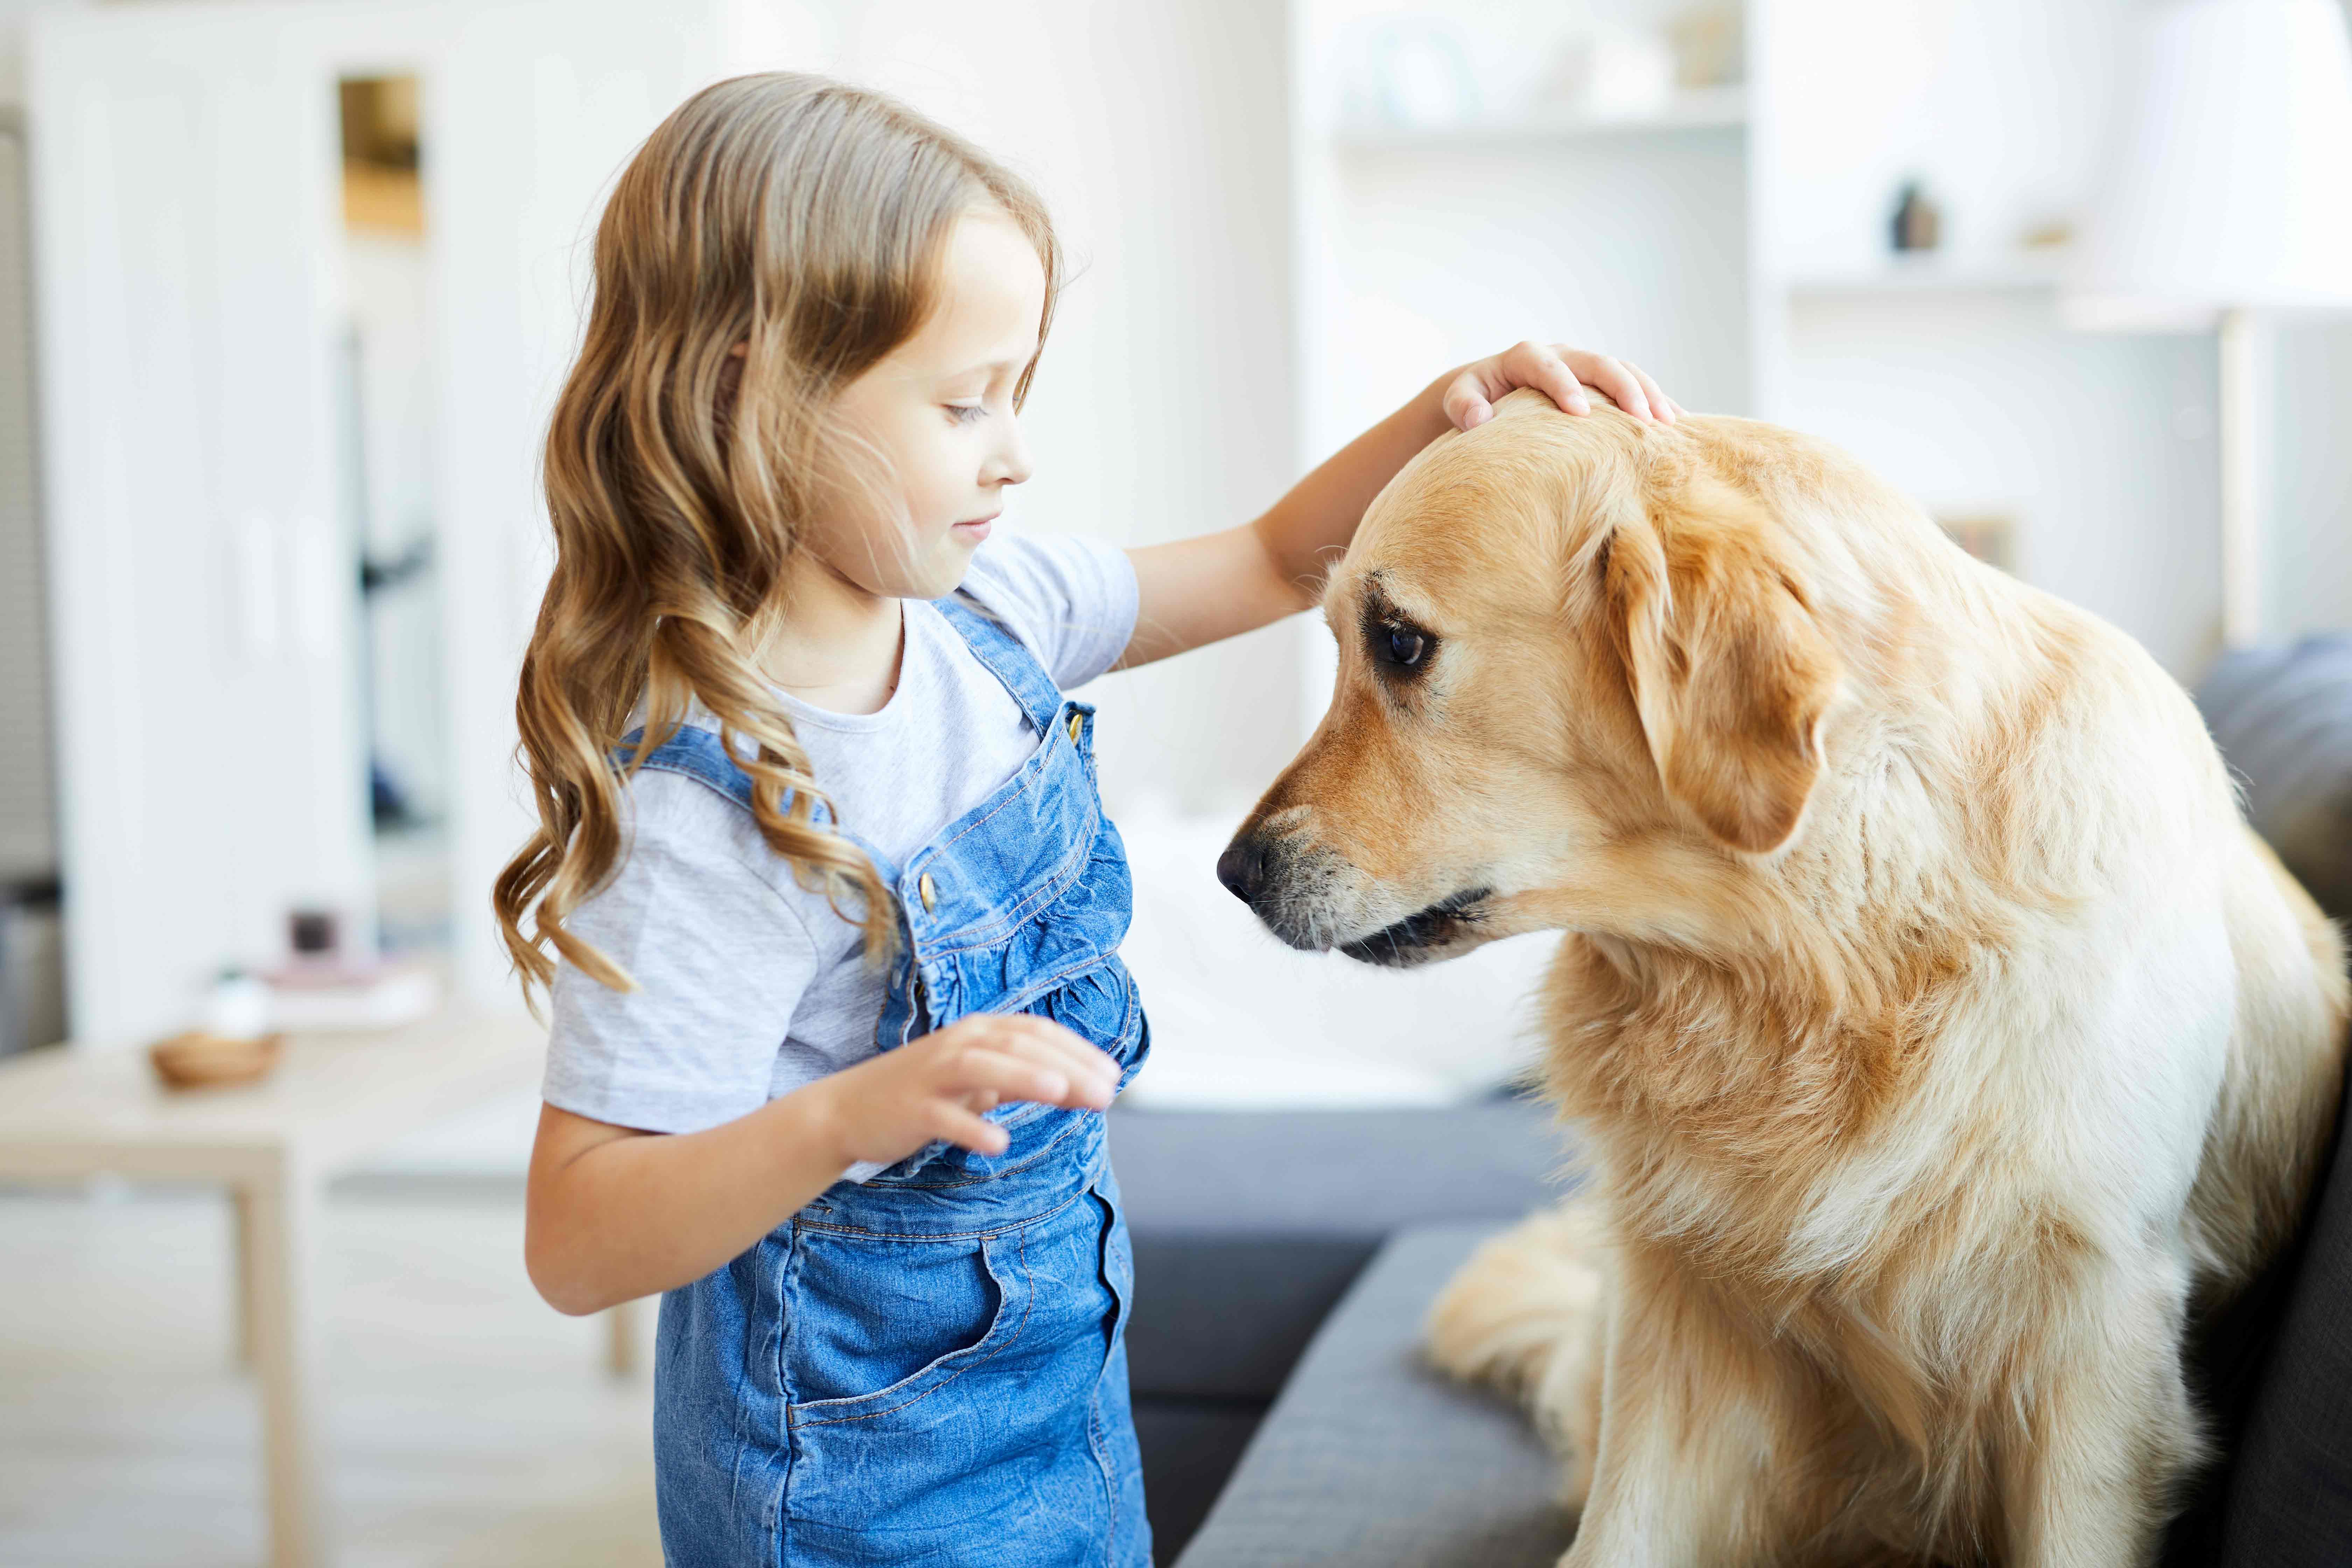 Teach Kids to Safely Interact with Pets AndesStraley